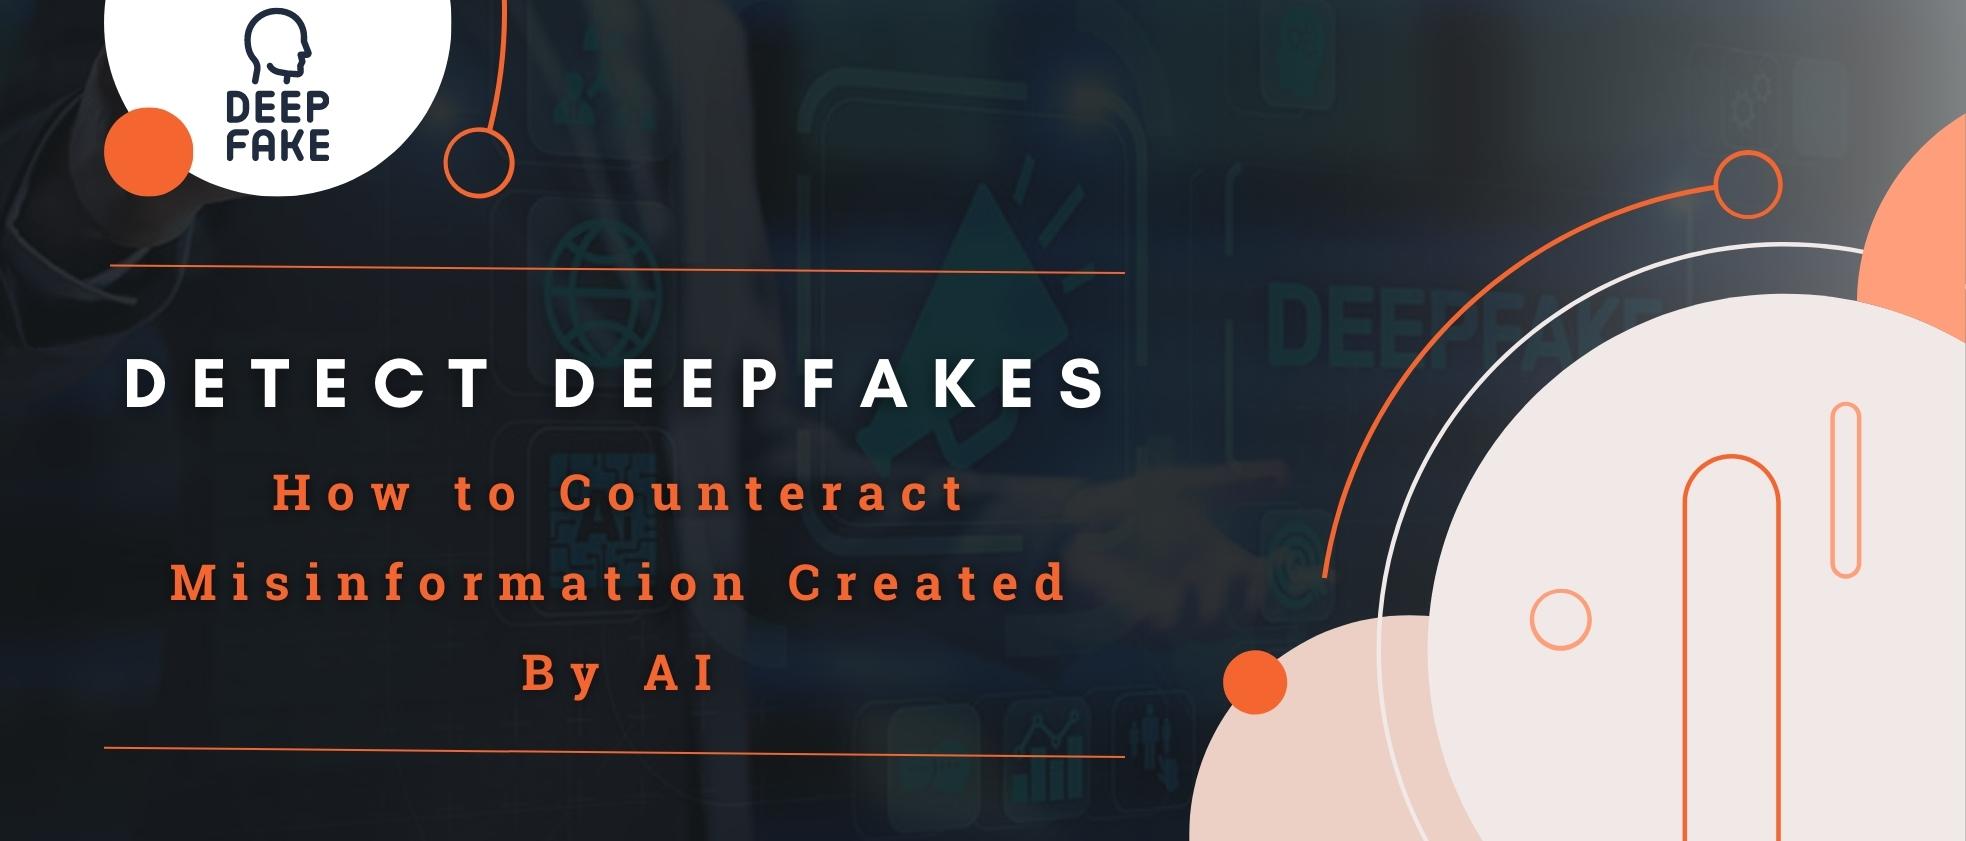 Detect Deepfakes: How to Counteract Misinformation Created By AI